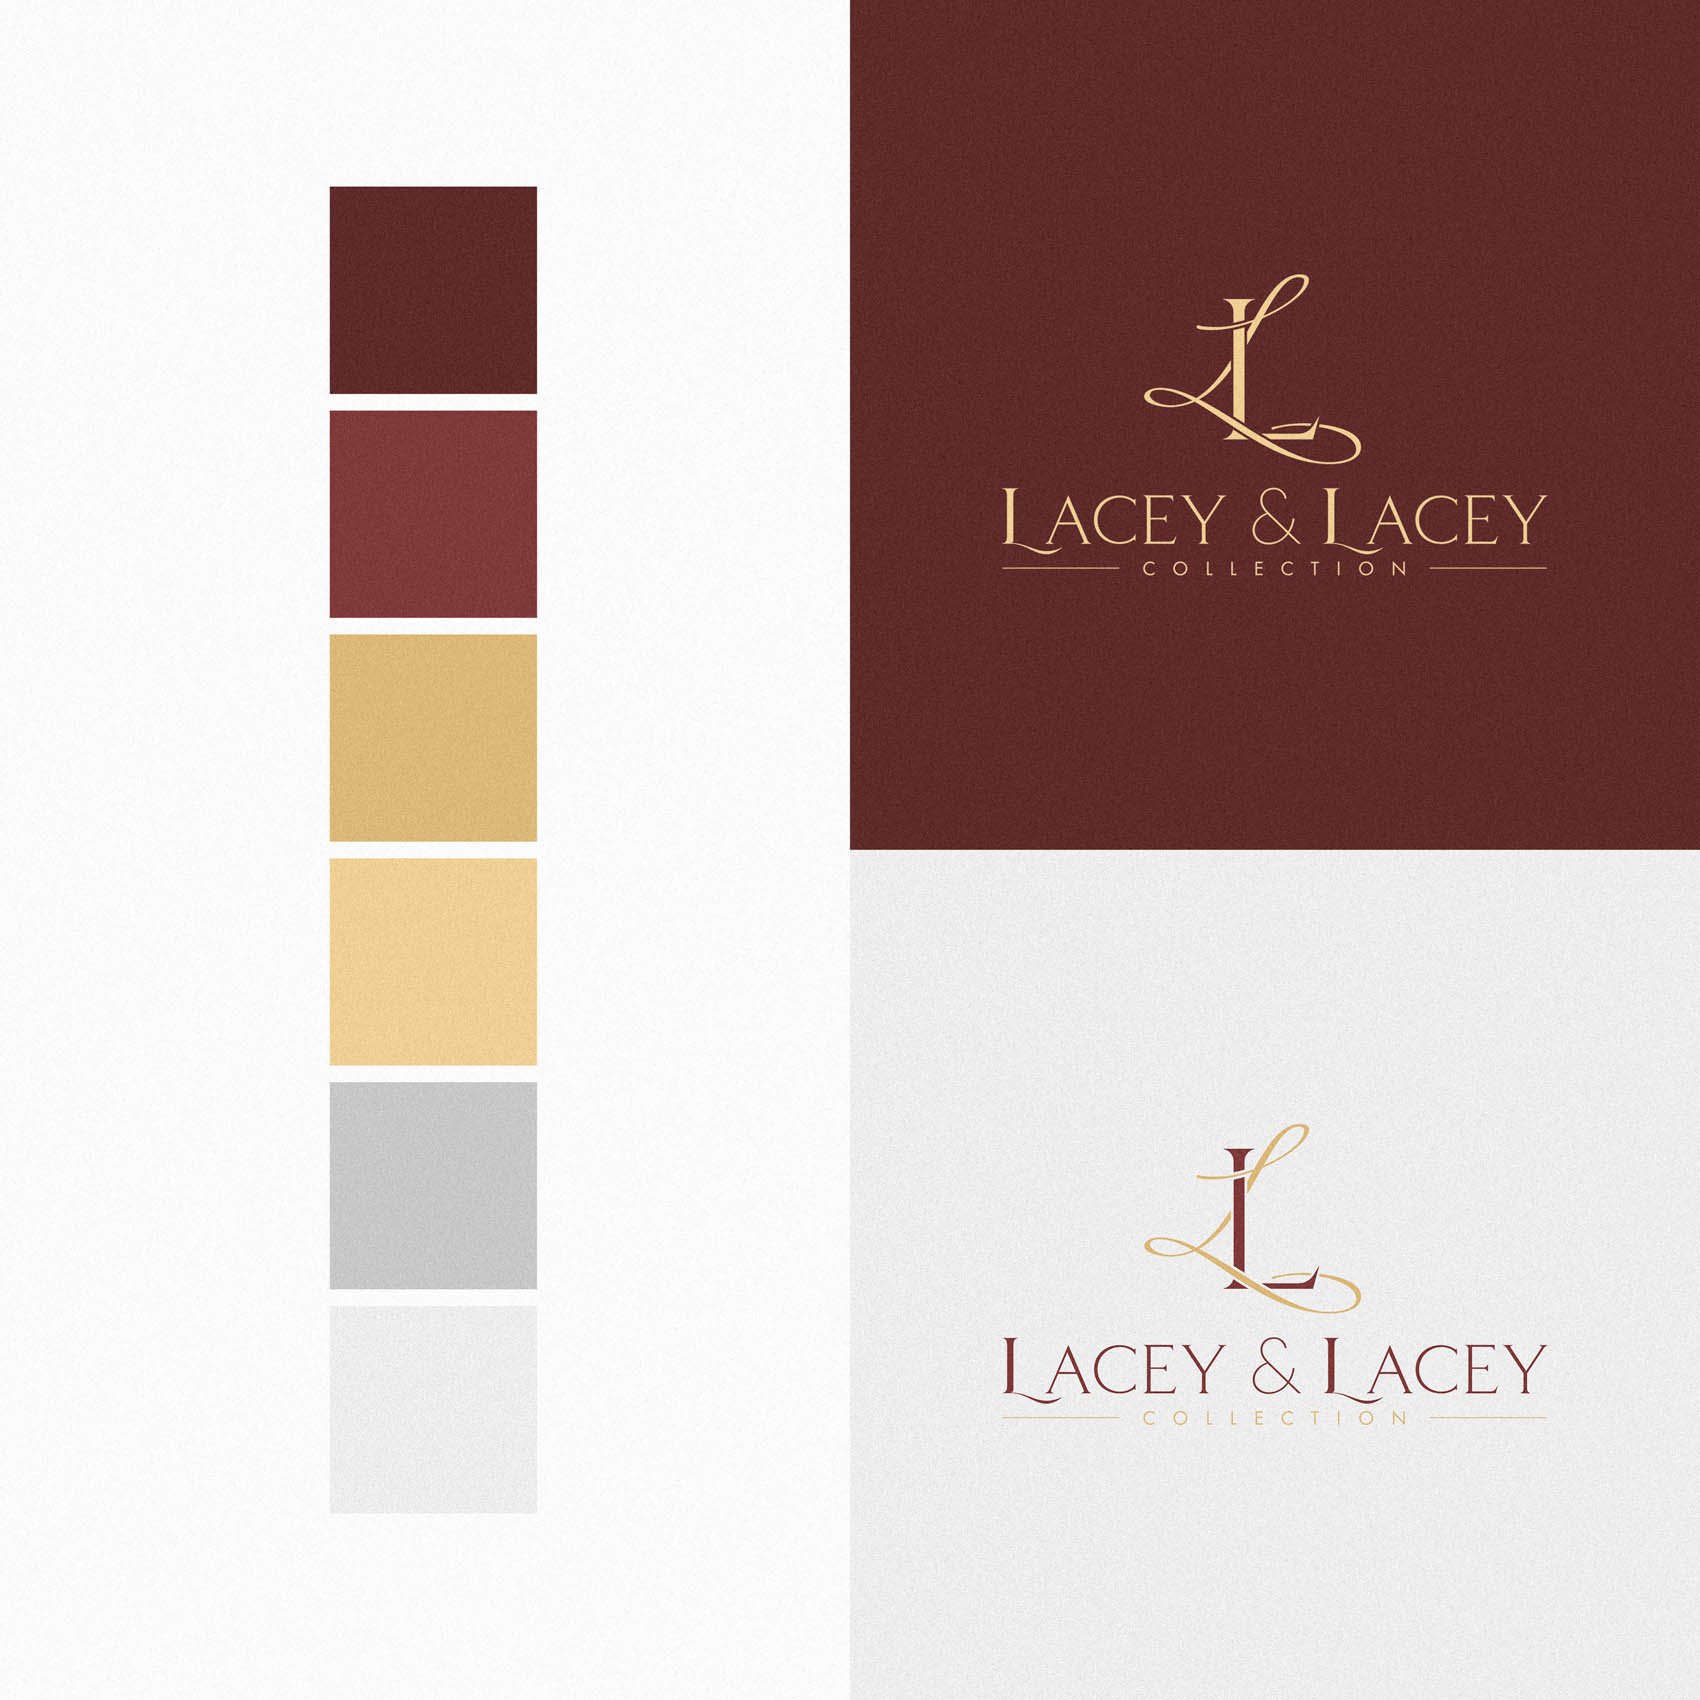 Lacey & Lacey - Luxury Candle Packaging Logo & Brand Identity4